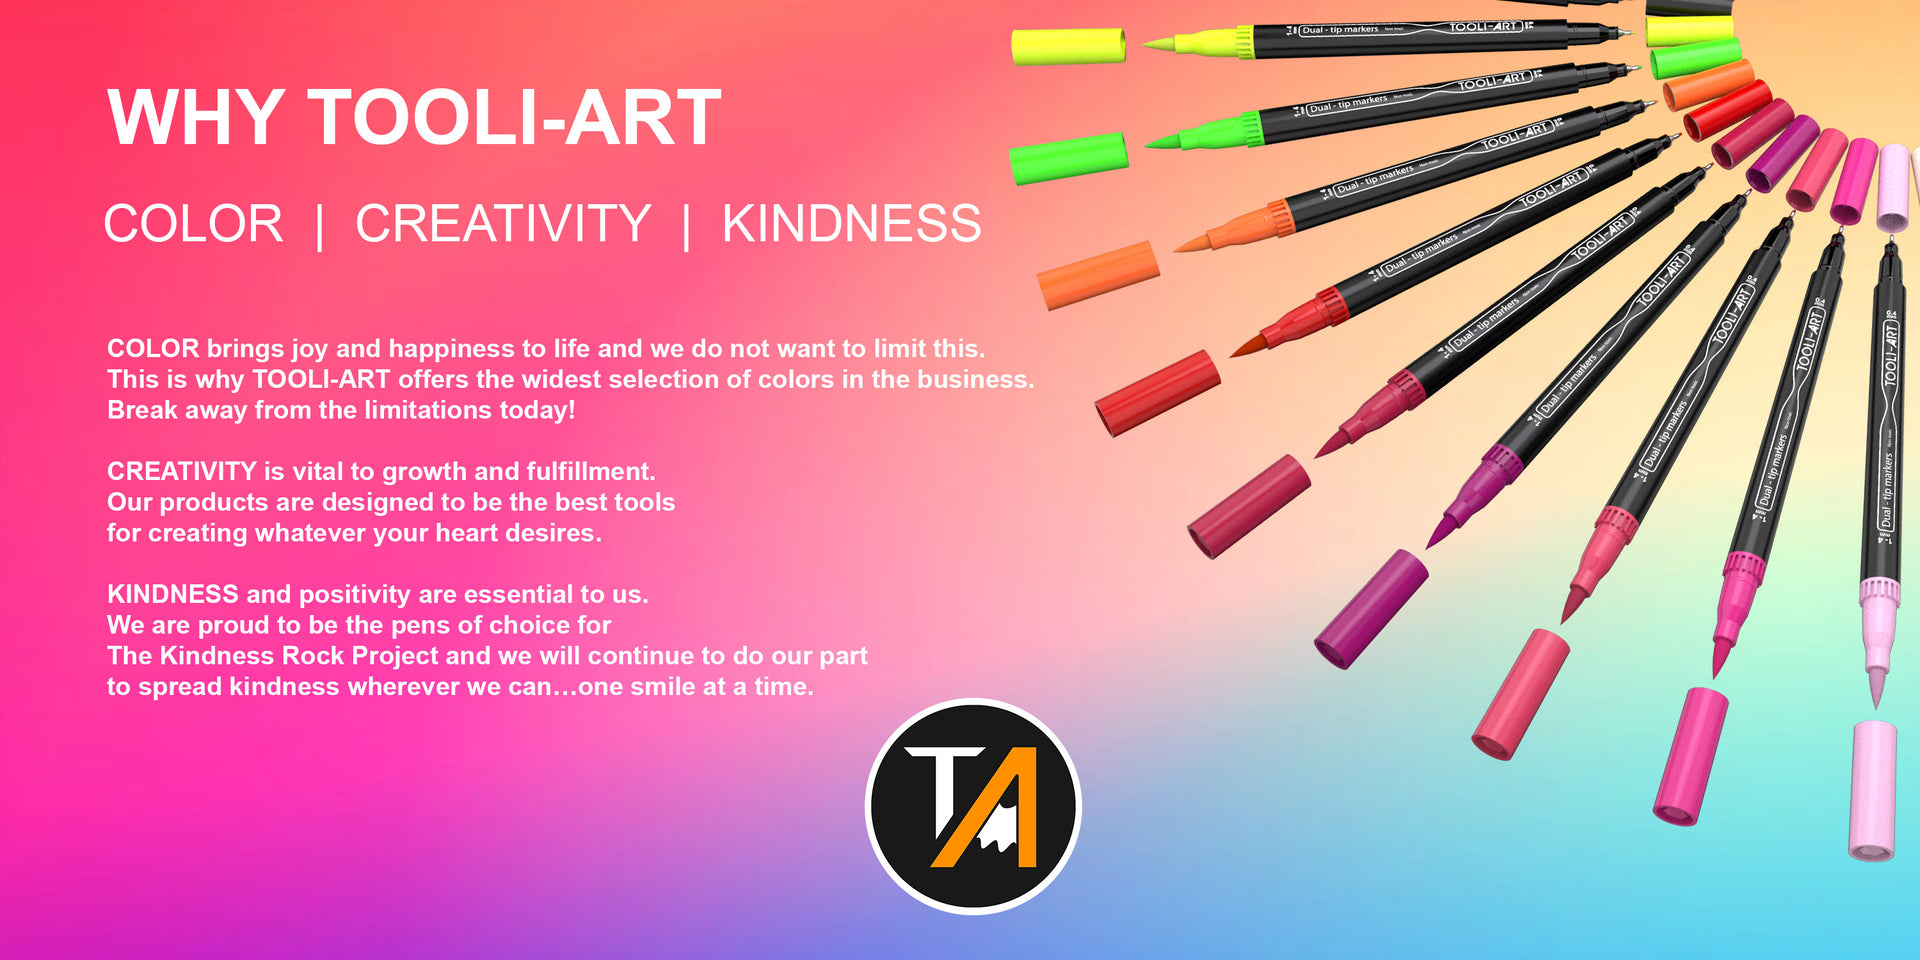 Load video: Why Tooli-Art philosophy, color creativity kindness